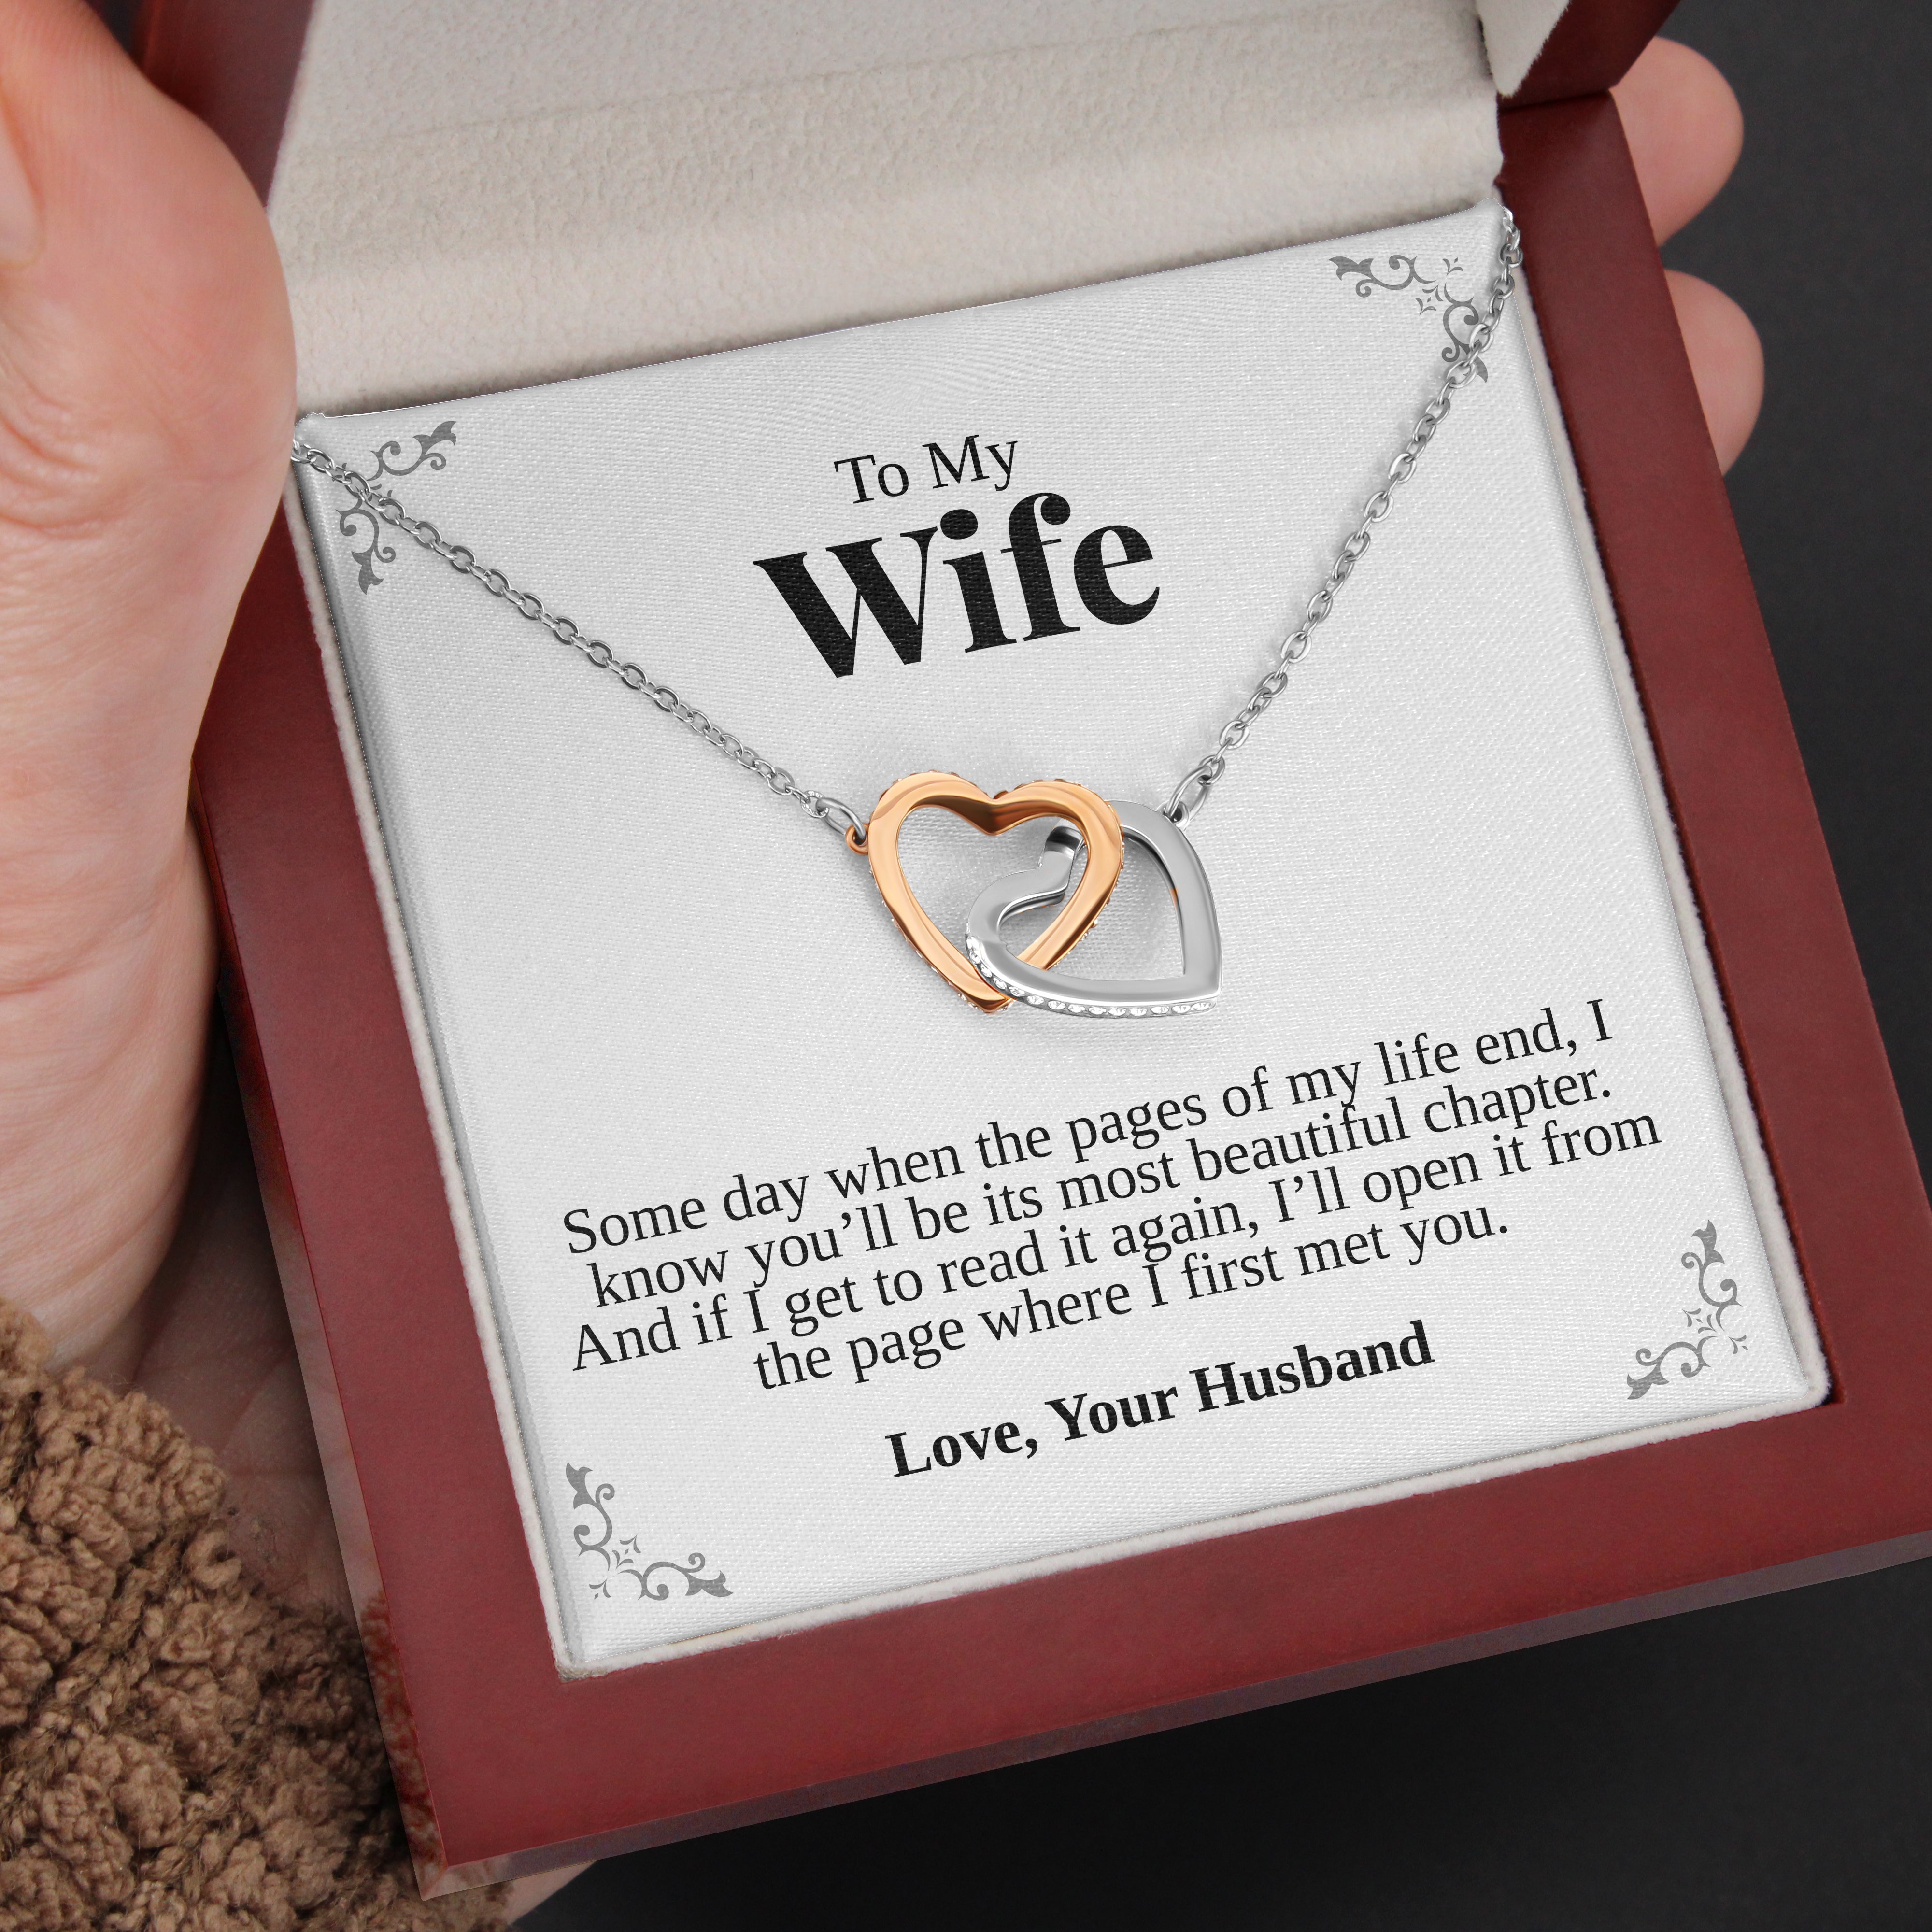 To My Wife | "Pages of my Life" | Interlocking Hearts Necklace